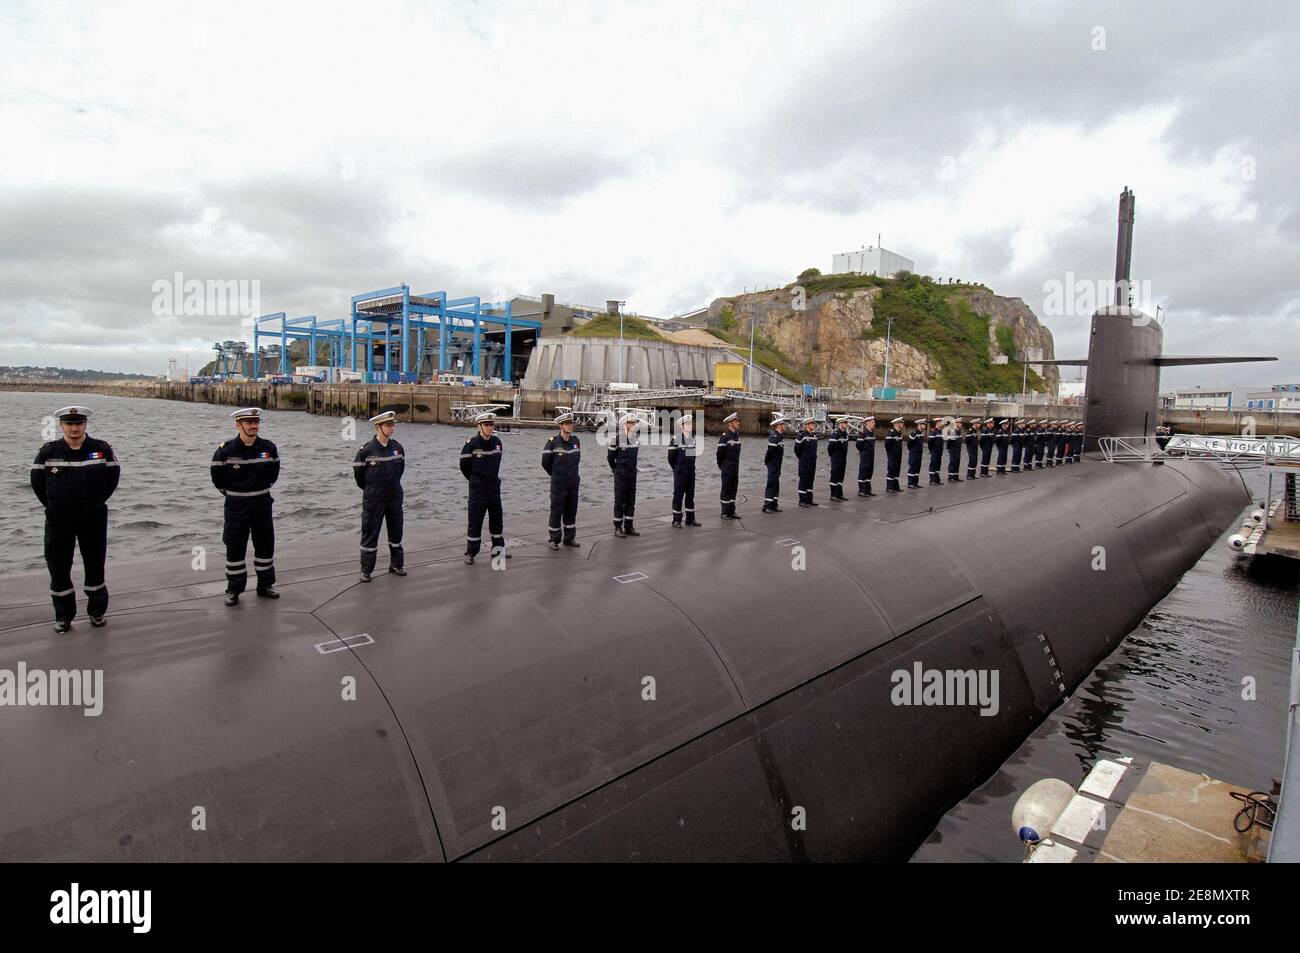 The 'Vigilant' nuclear submarine, at l'Ile Longue military base, in  northwestern region of Brittany, France, on July 13, 2007. Photo by  Witt/Pool/ABACAPRESS.COM Stock Photo - Alamy